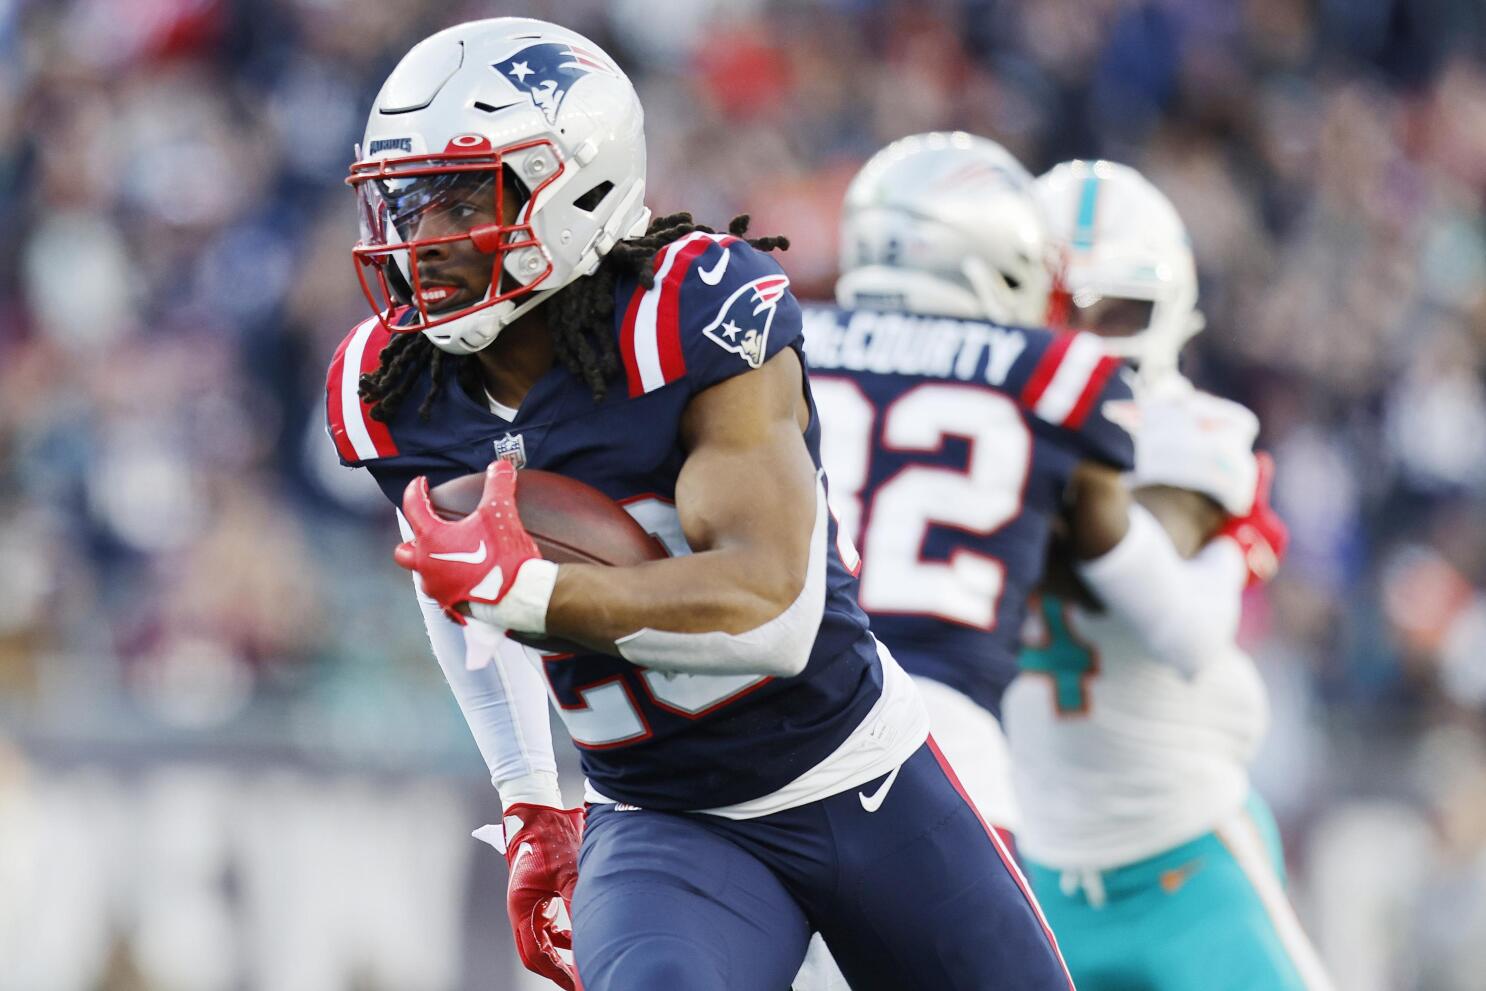 Dugger INT return helps lift Pats over fading Dolphins 23-21